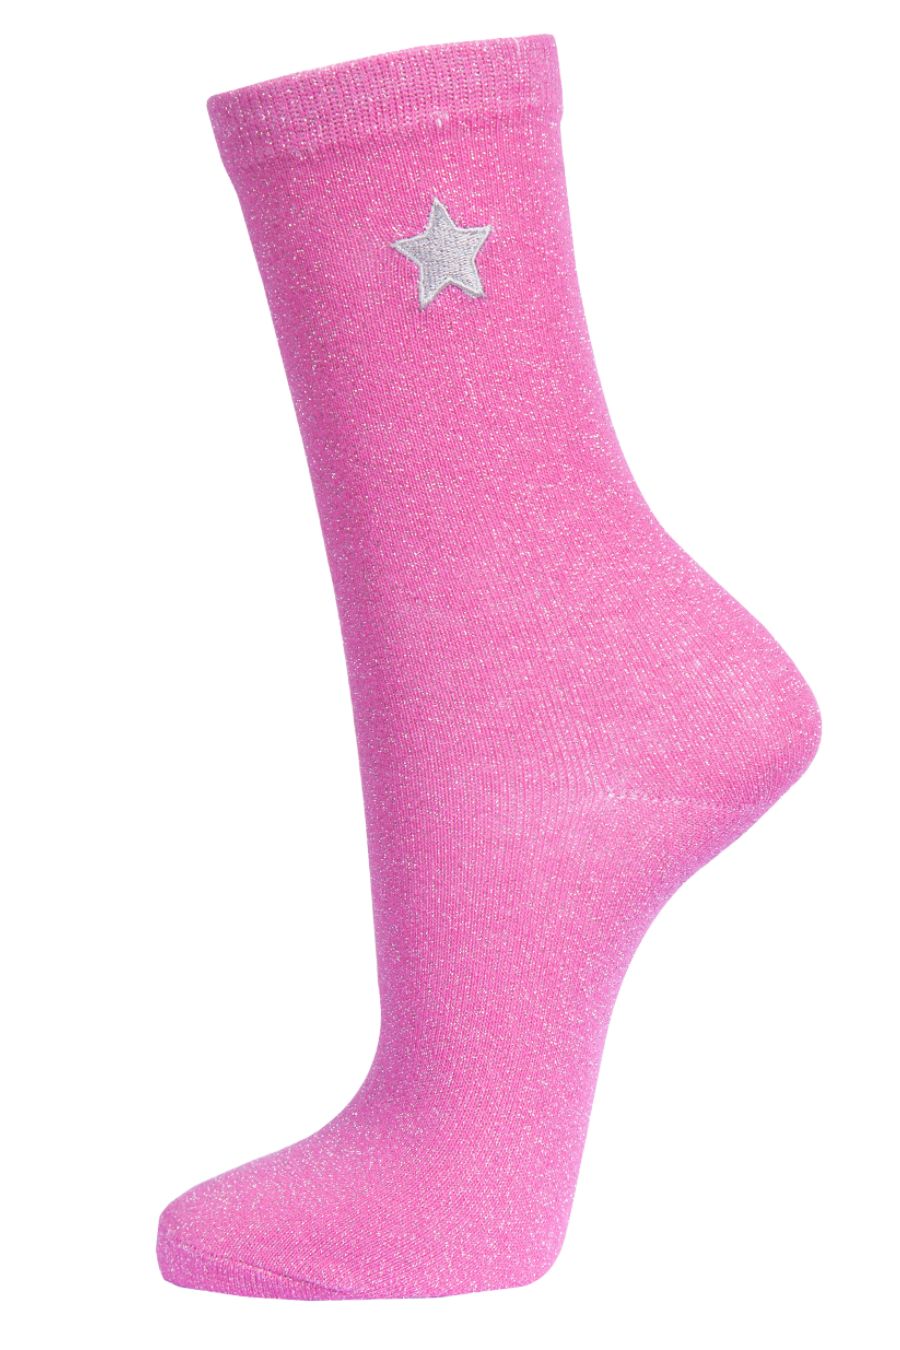 fuchsia pink and silver glitter socks with an embroidered star on the ankle